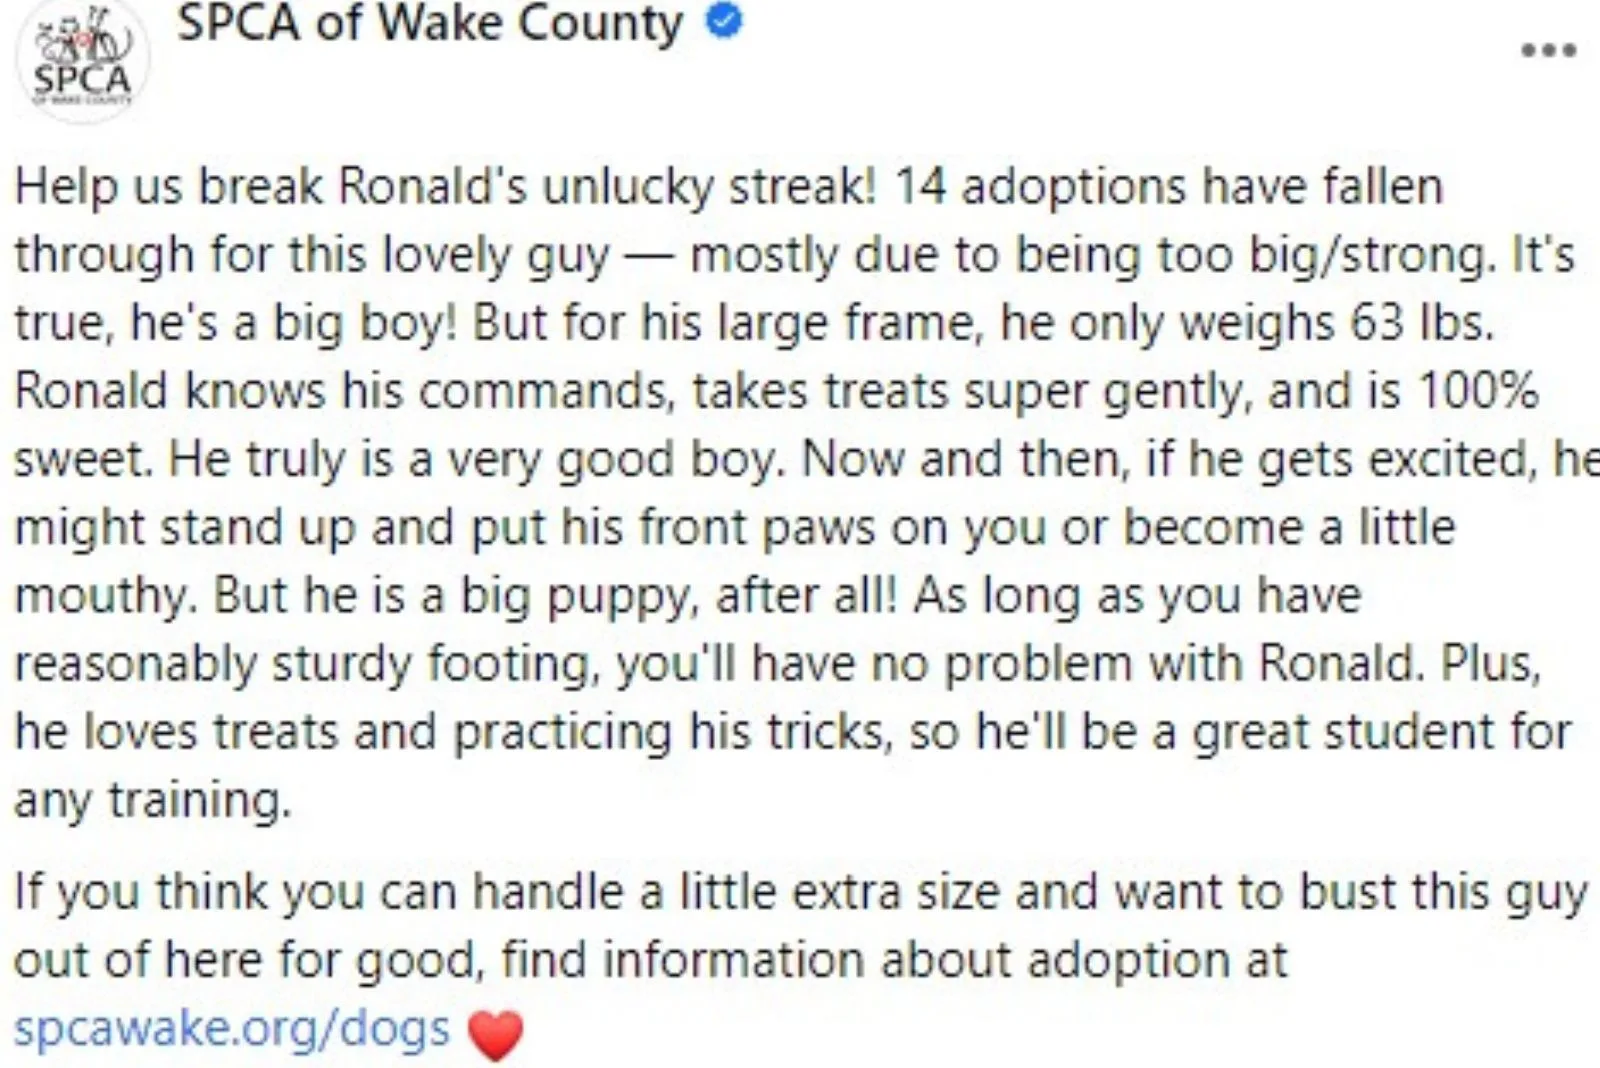 post about dog's adoption